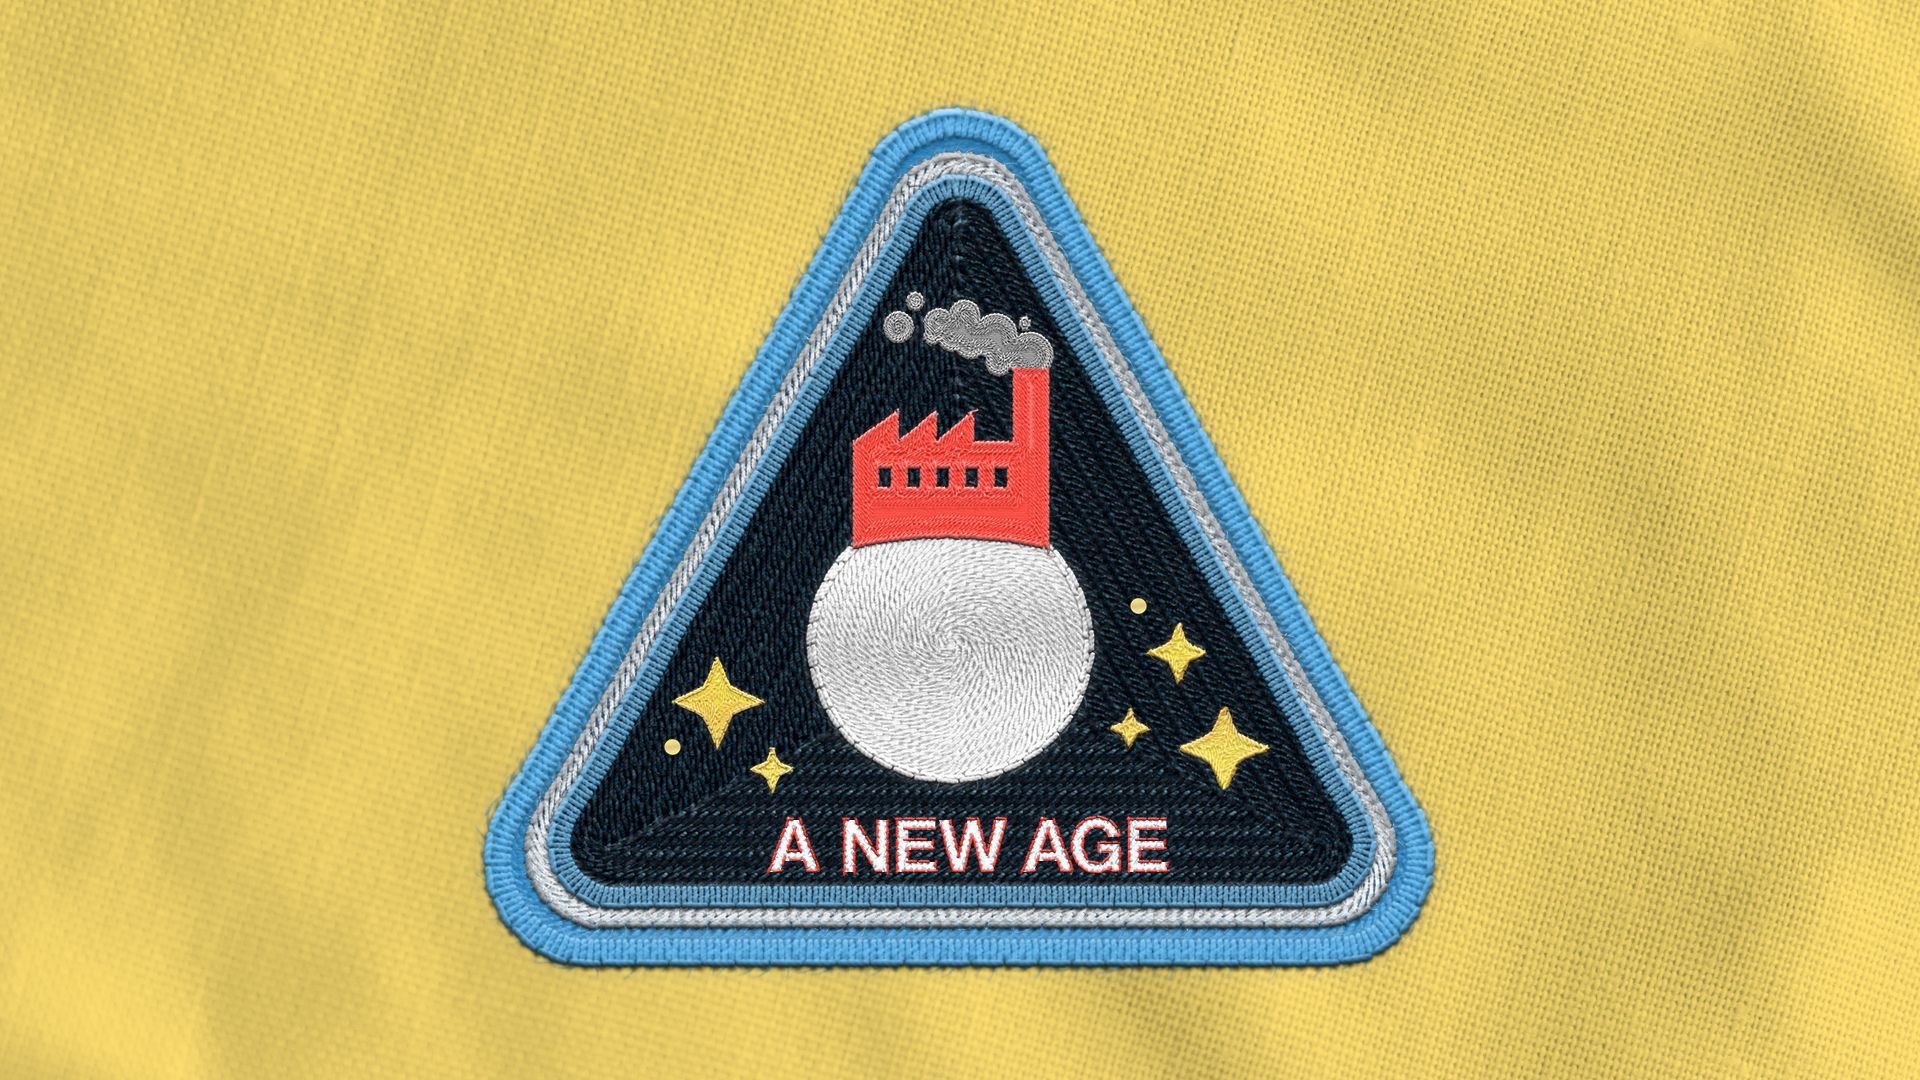 Illustration of an astronaut badge depicting a factory on the moon, the words "A NEW AGE" are on the badge. 